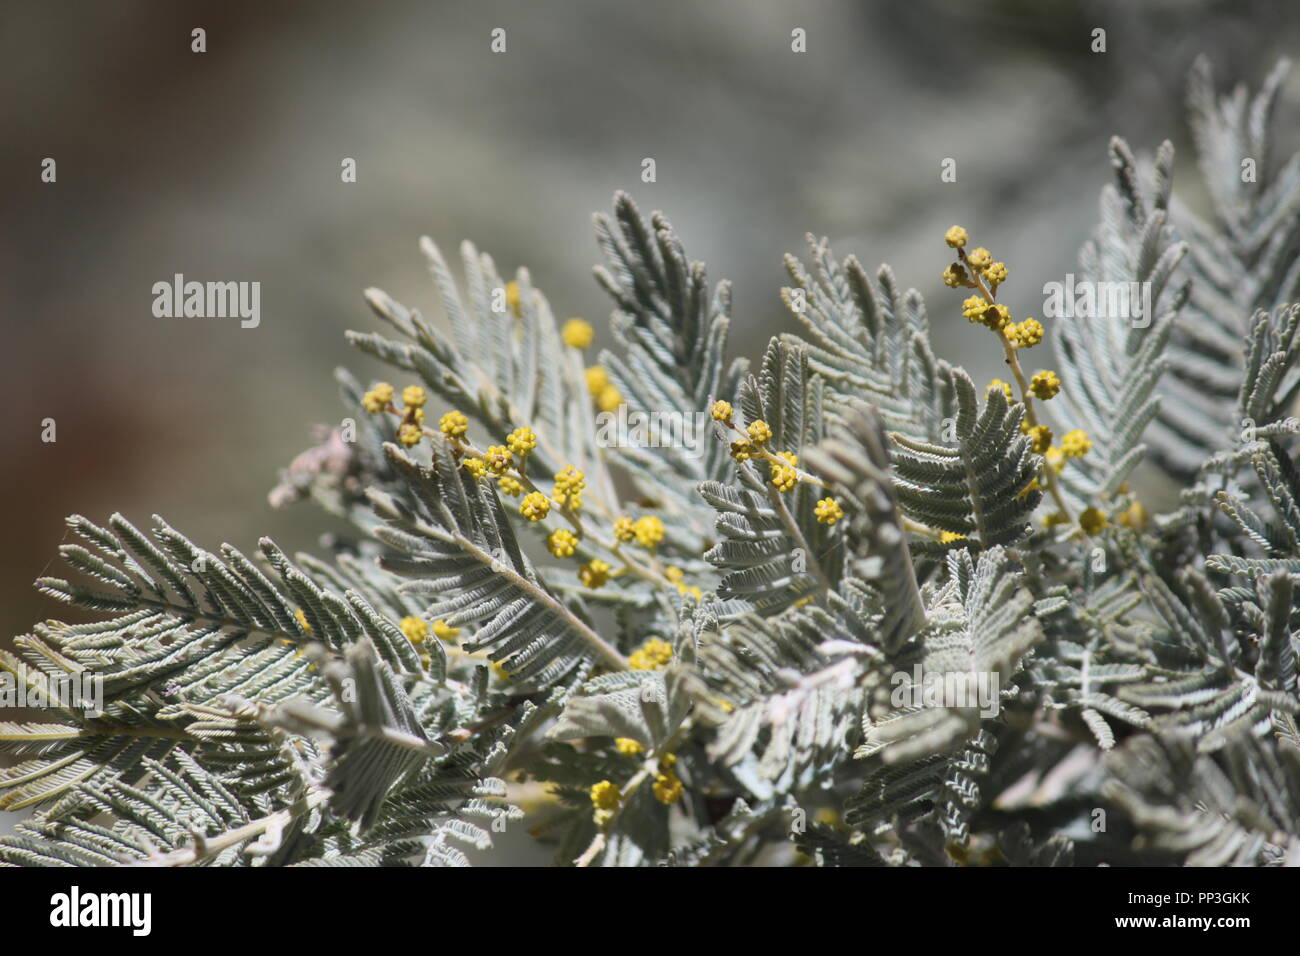 Wattle tree close up showing true leaves and flowers in Brindabella Ranges, ACT Australia Stock Photo